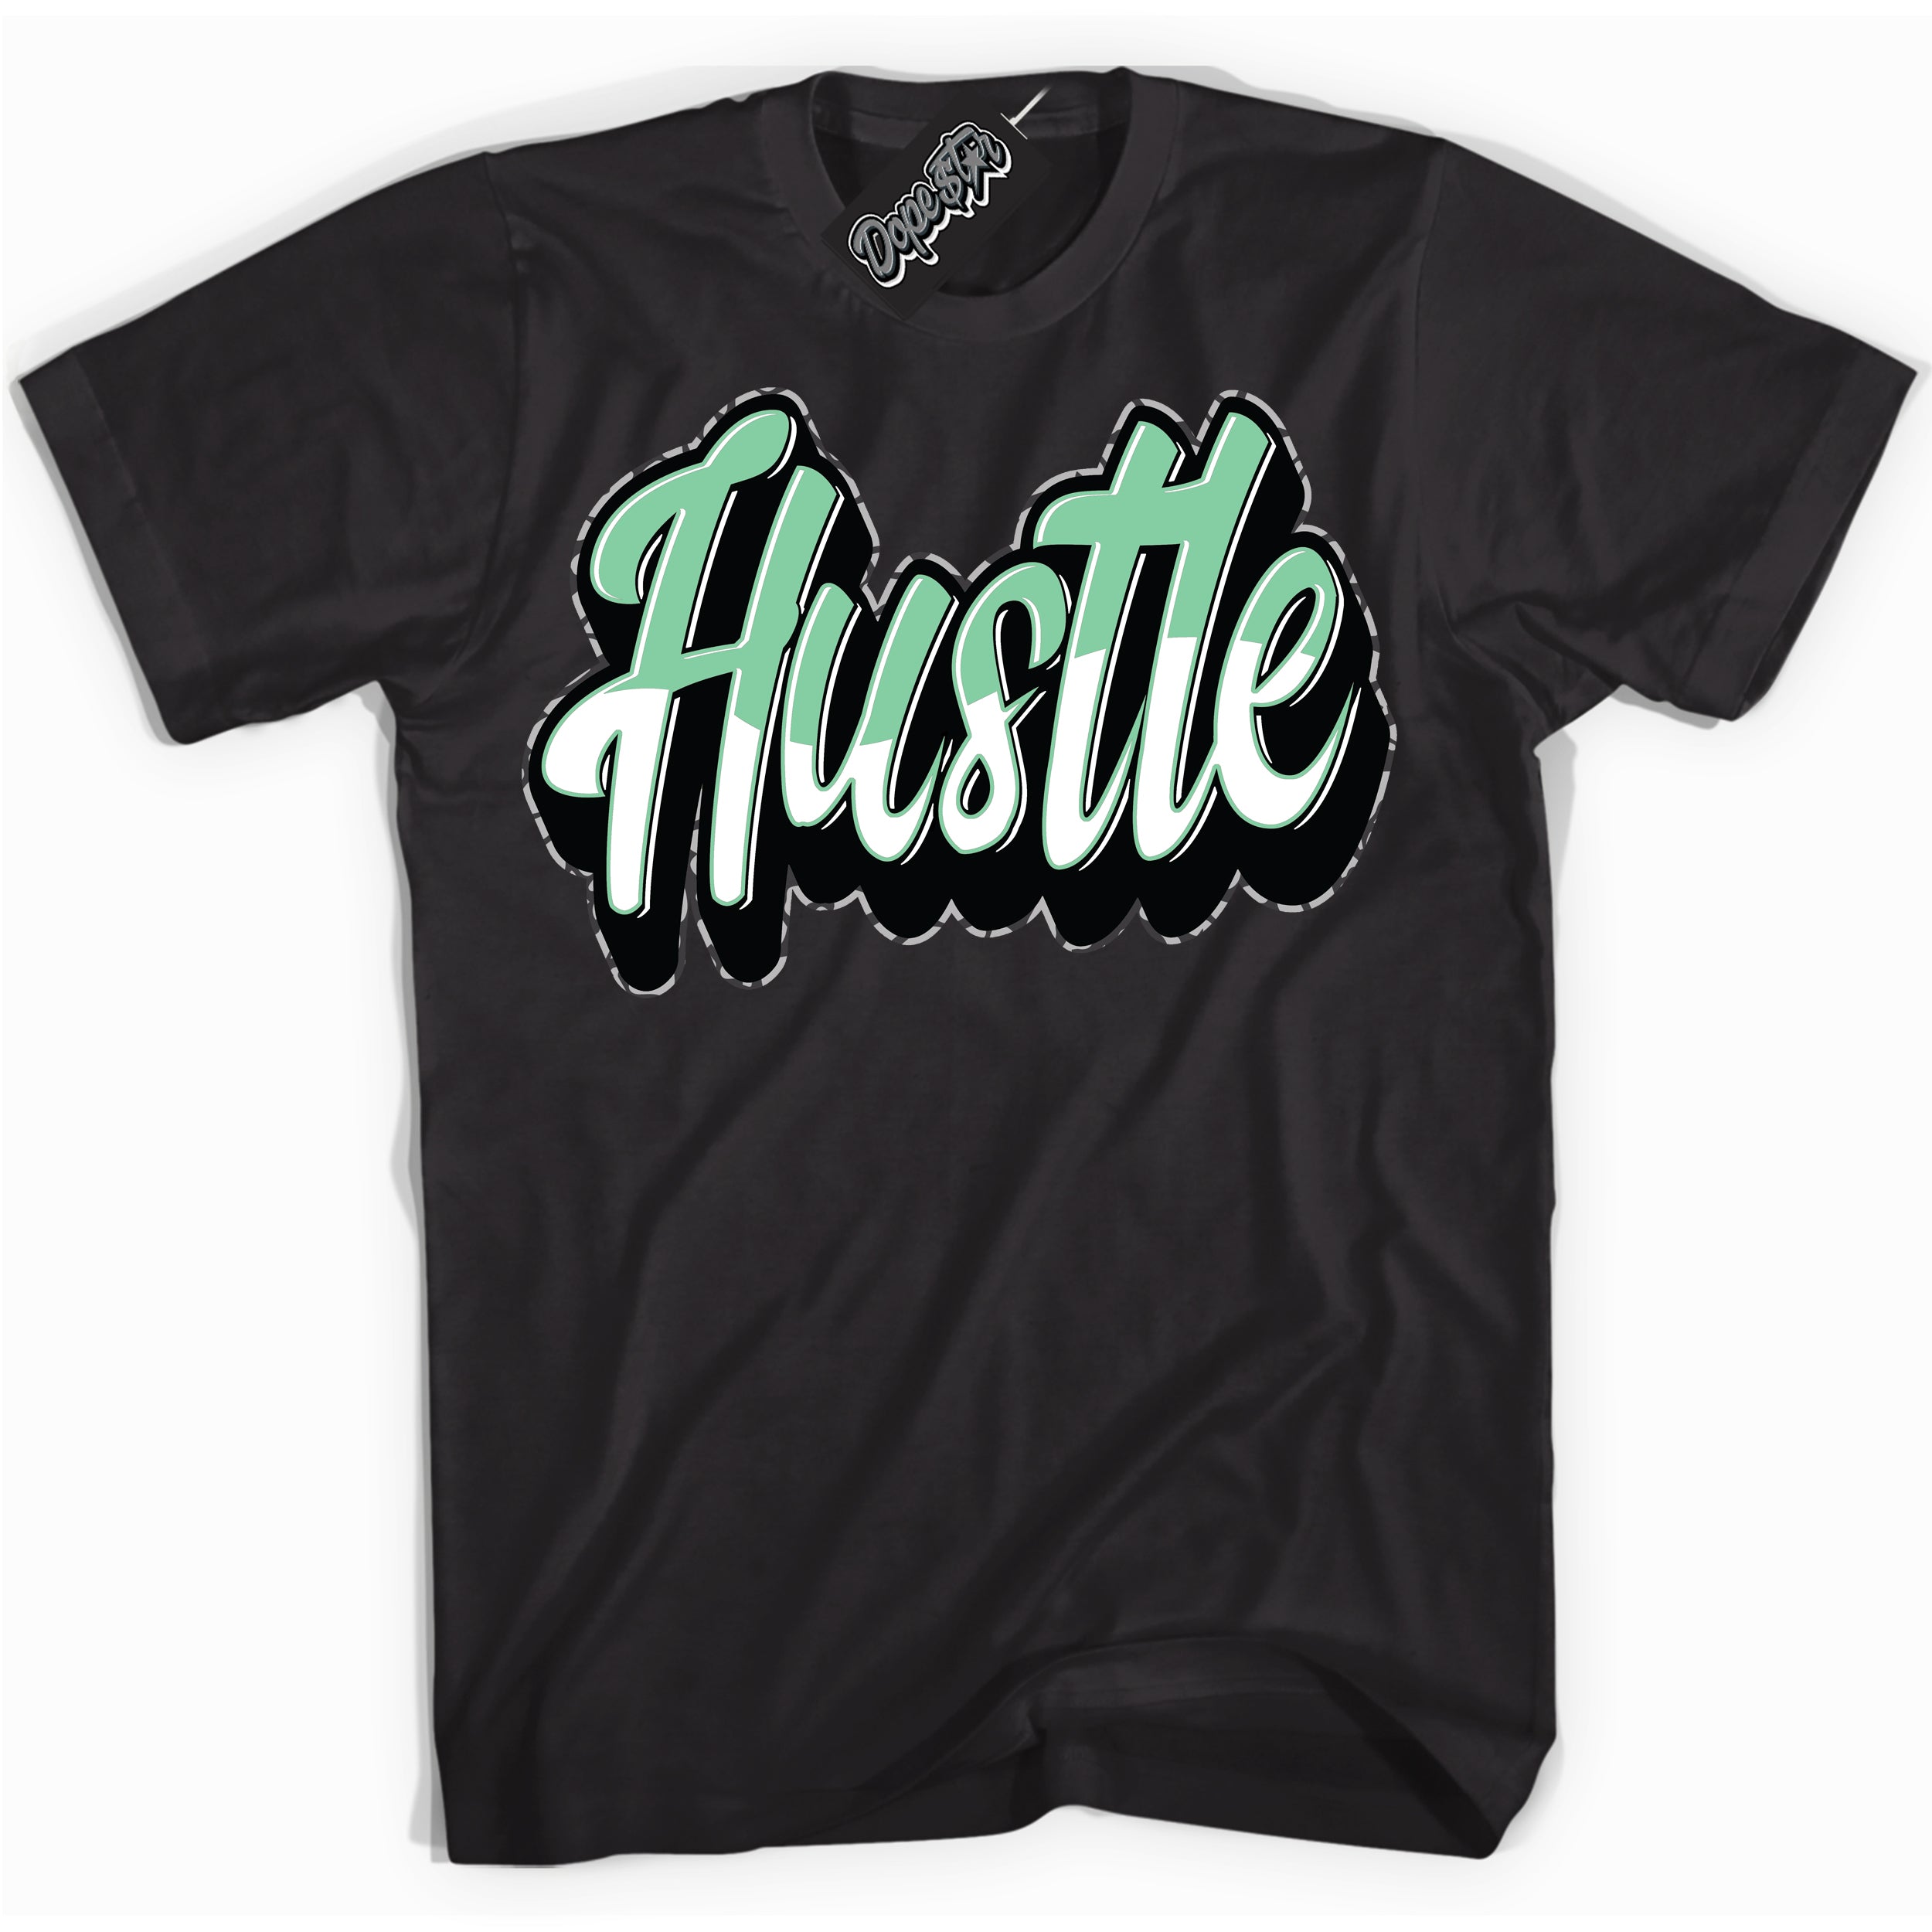 Cool Black graphic tee with “ Hustle 2 ” design, that perfectly matches Green Glow 3s sneakers 